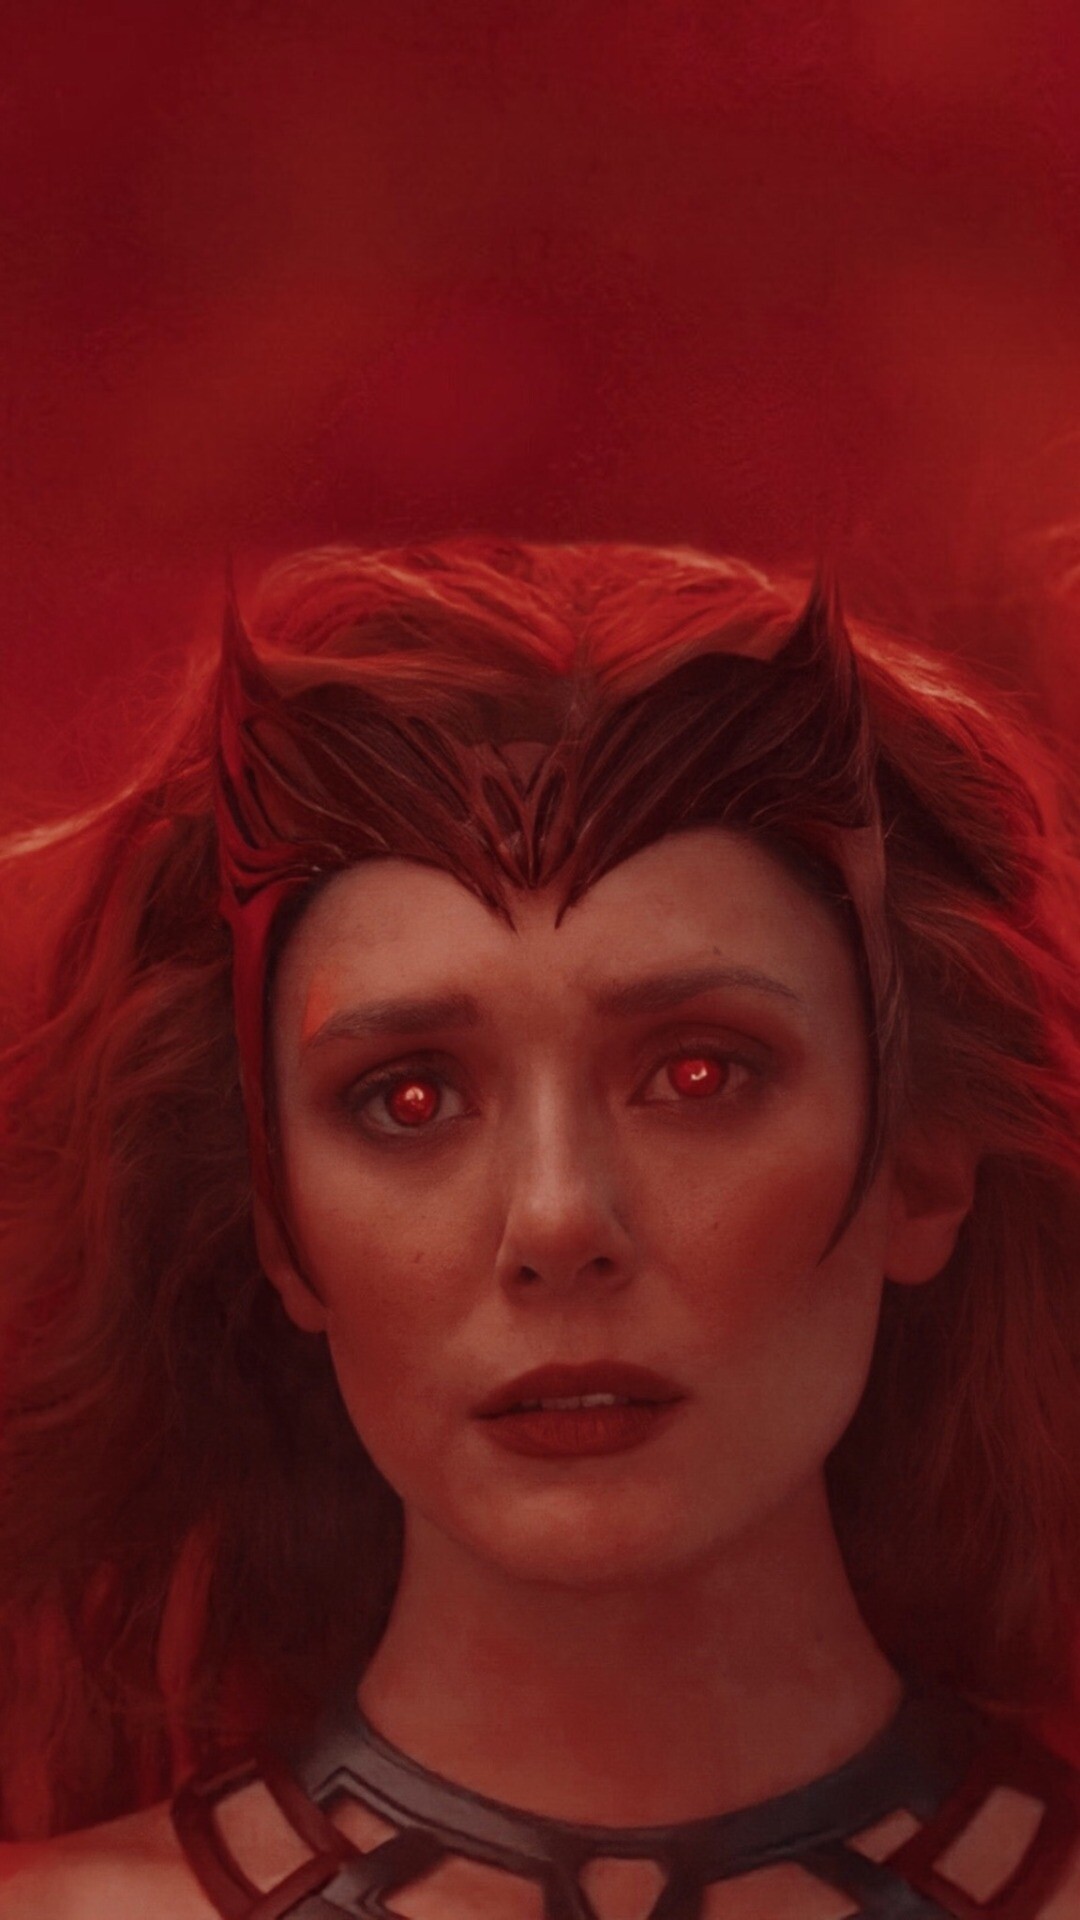 WandaVision: Scarlet Witch, an Avenger who engage in telepathy and telekinesis, and alter reality. 1080x1920 Full HD Background.